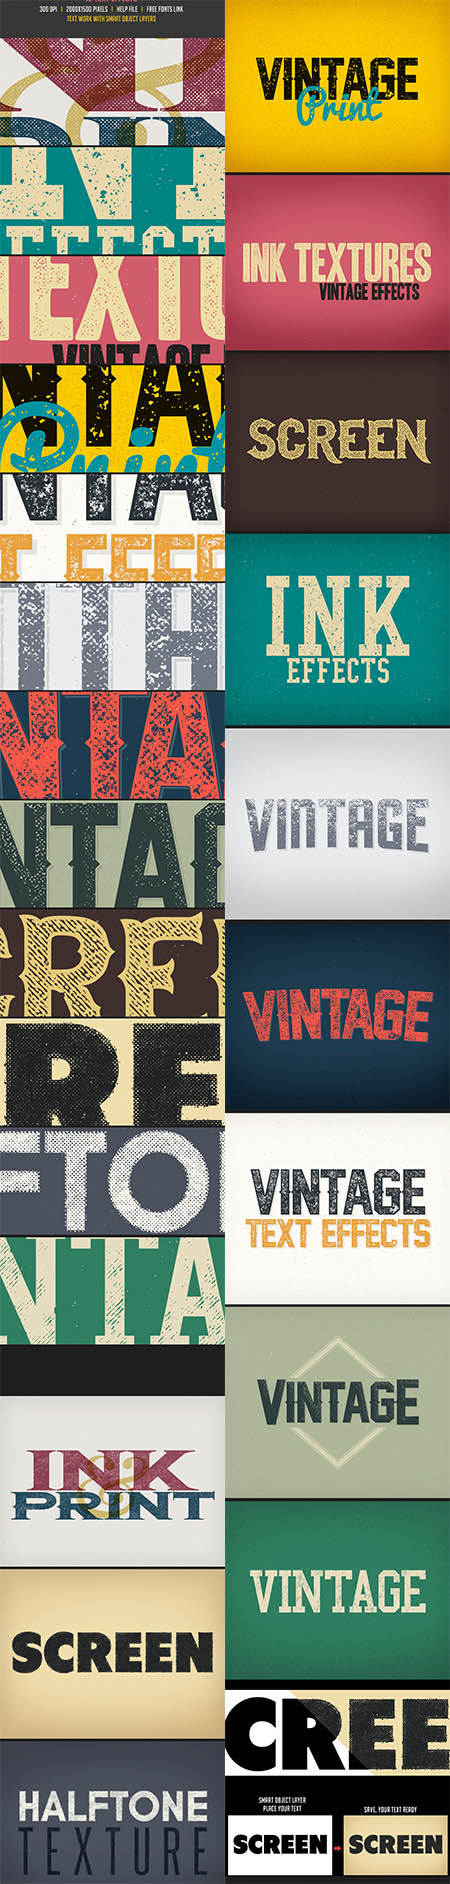 GraphicRiver - Letter/Ink Press Vintage Text Effects 4 11715170